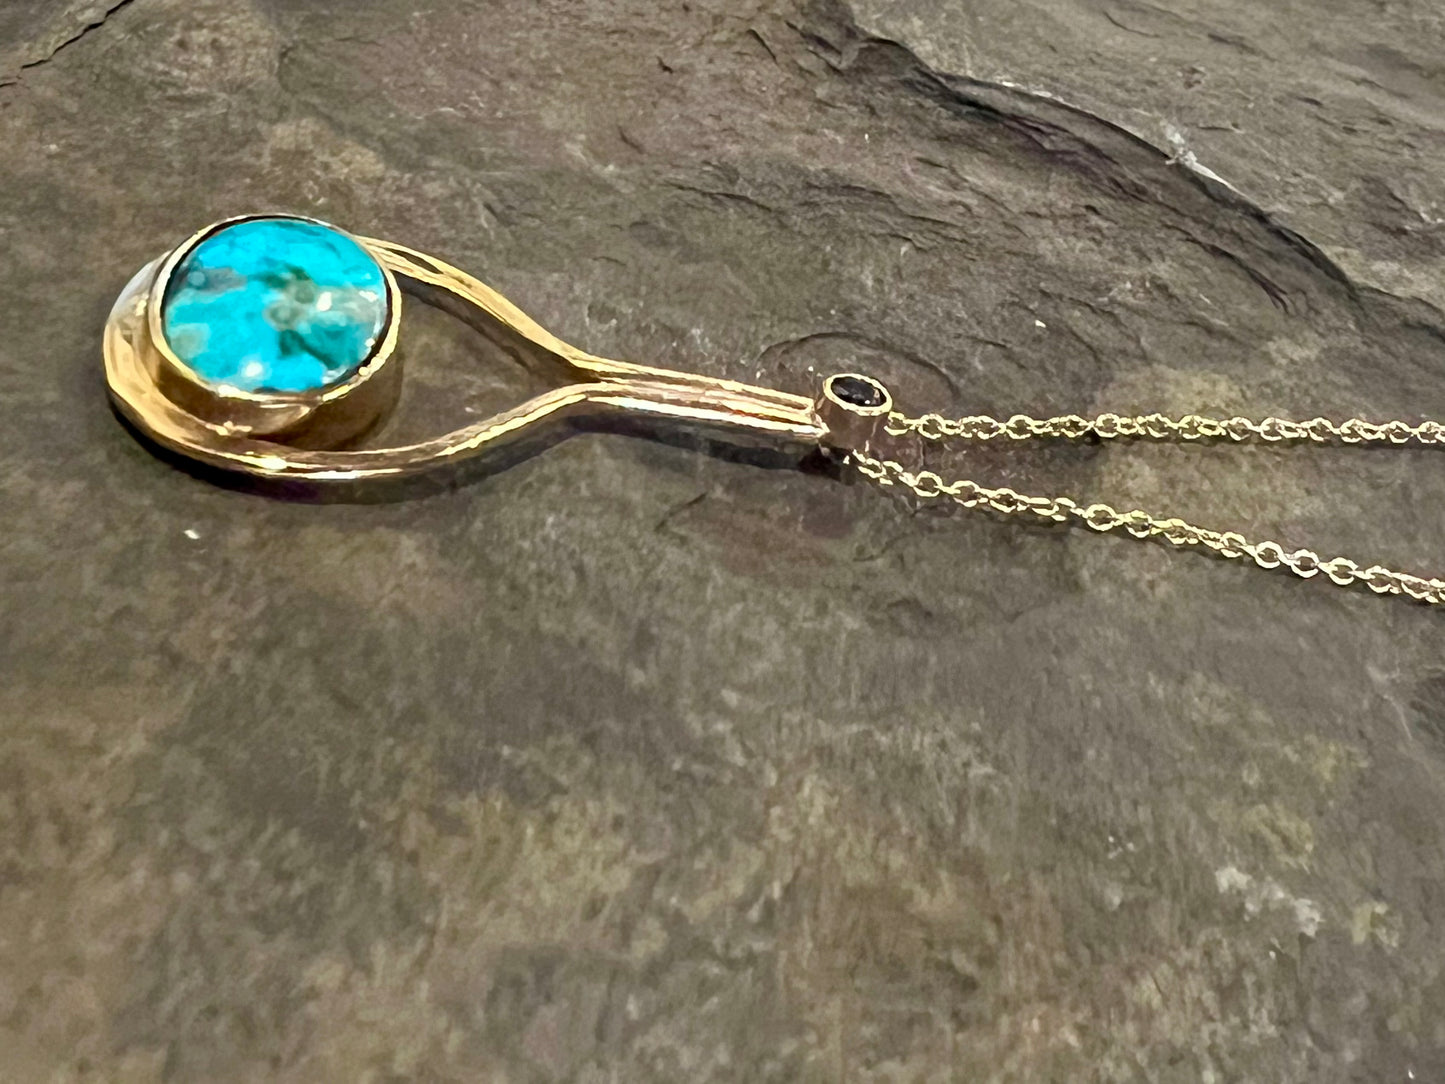 Forged Droplet with Turquoise & Blue Green Diamond - One of a Kind Necklace